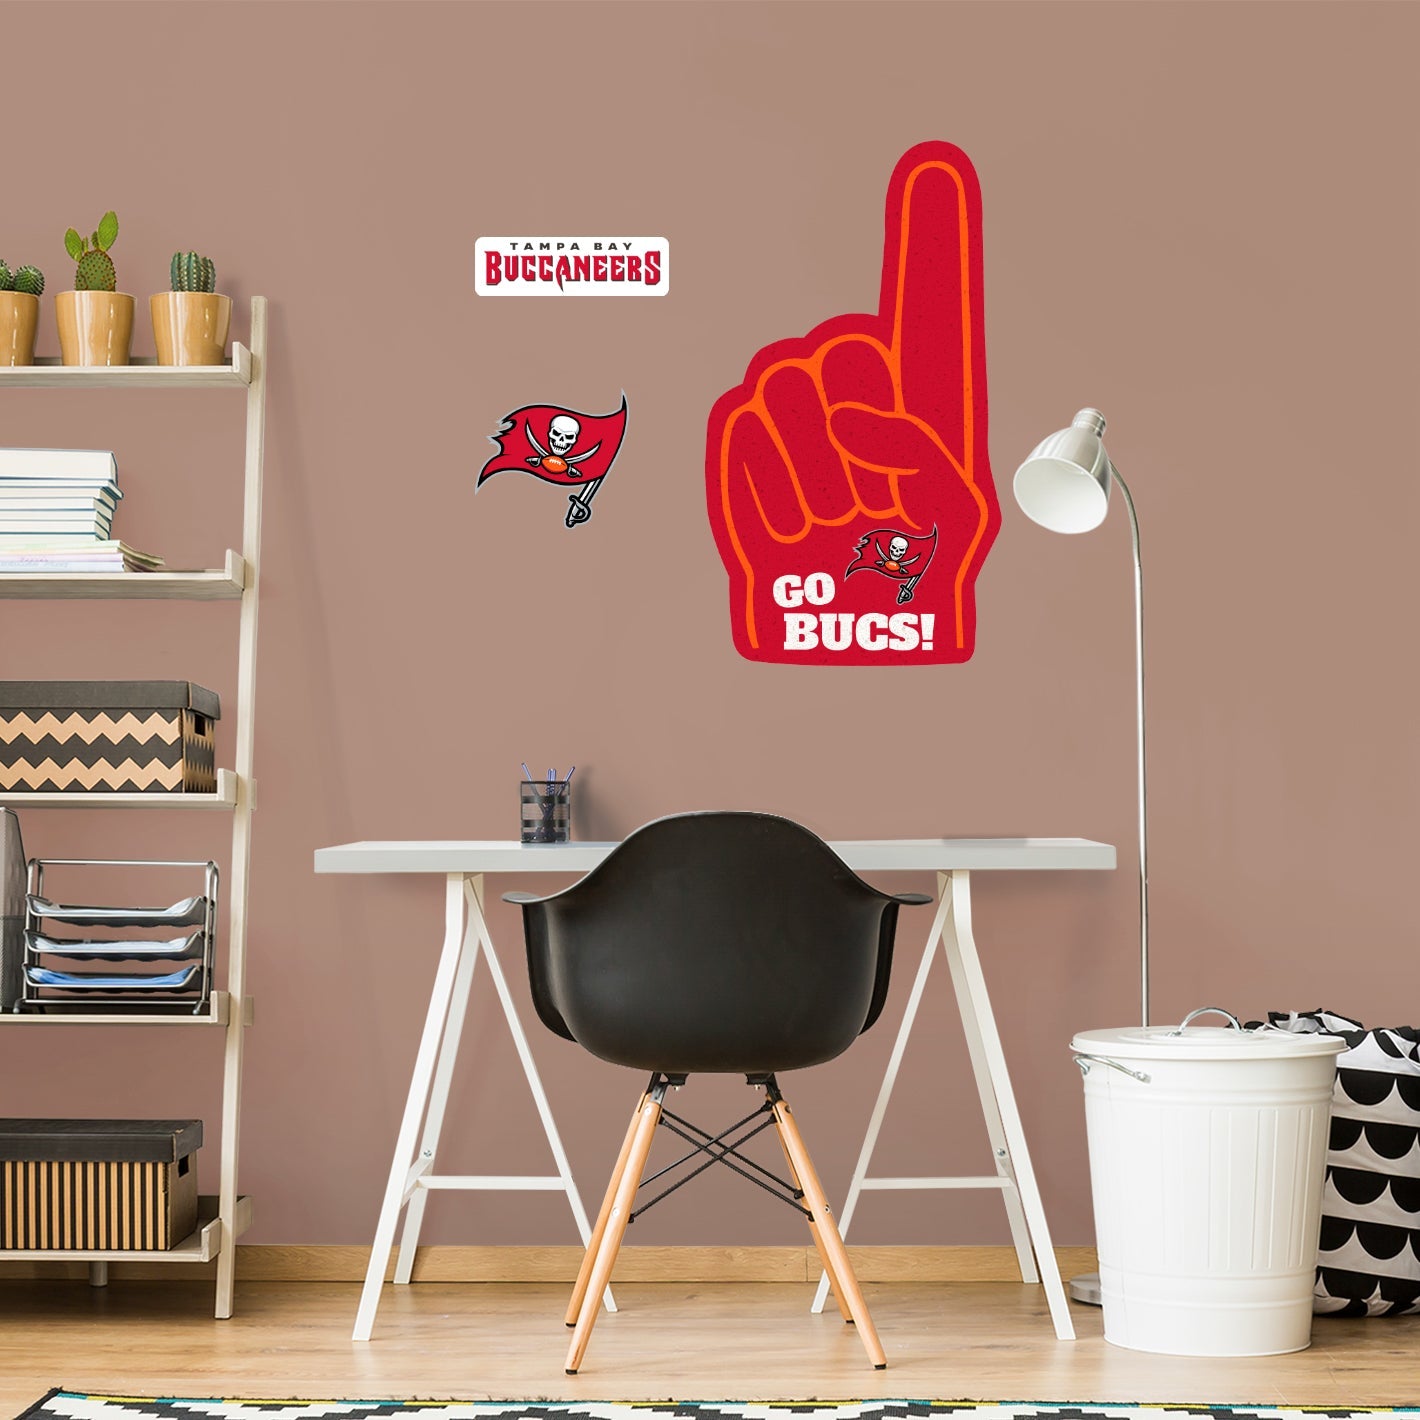 Tampa Bay Buccaneers: Foam Finger - Officially Licensed NFL Removable Adhesive Decal